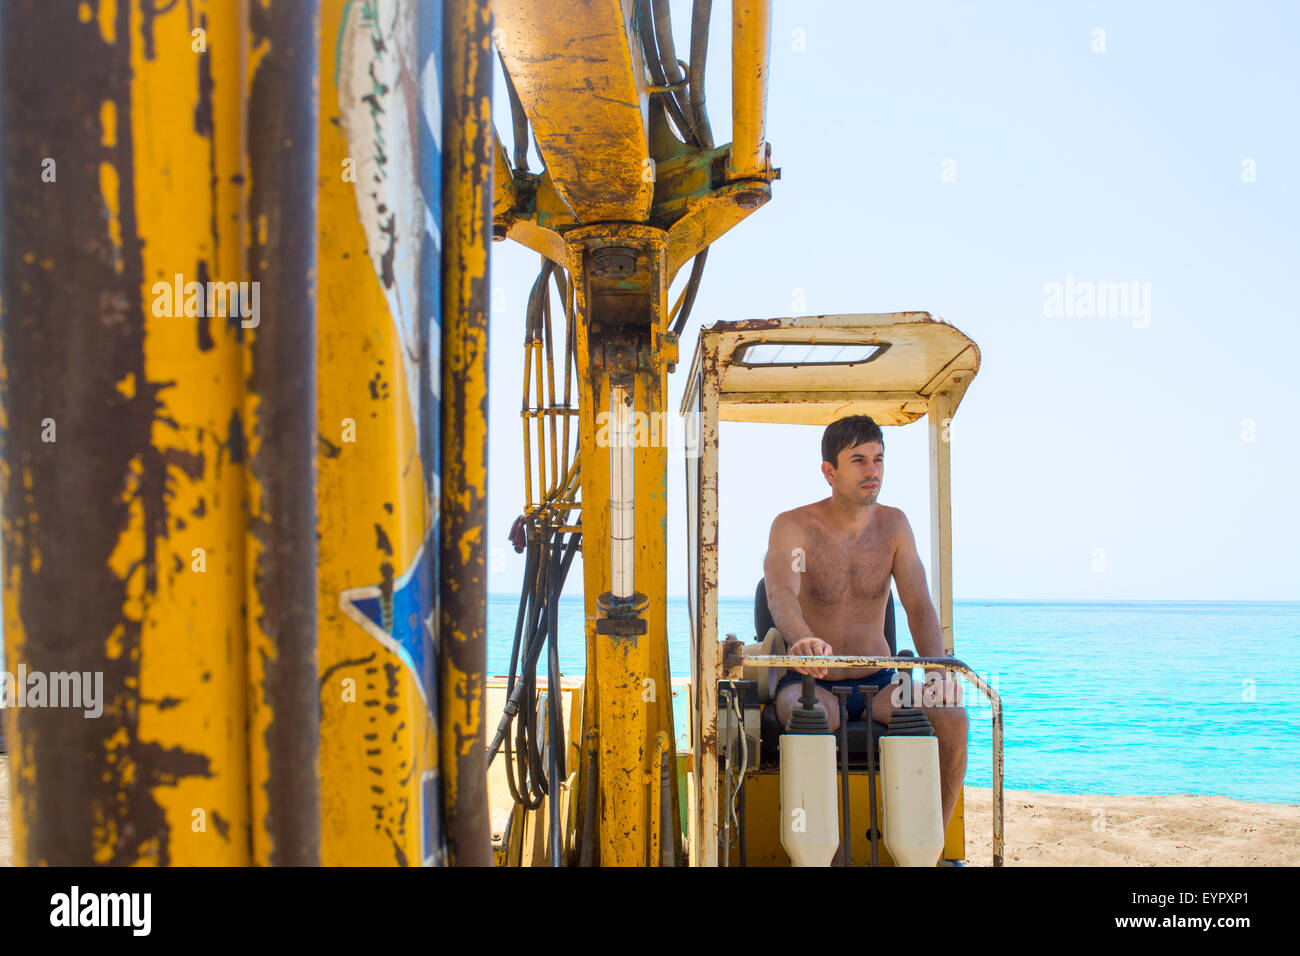 Young man operating the bulldozer at the beach on a hot summer day Stock Photo